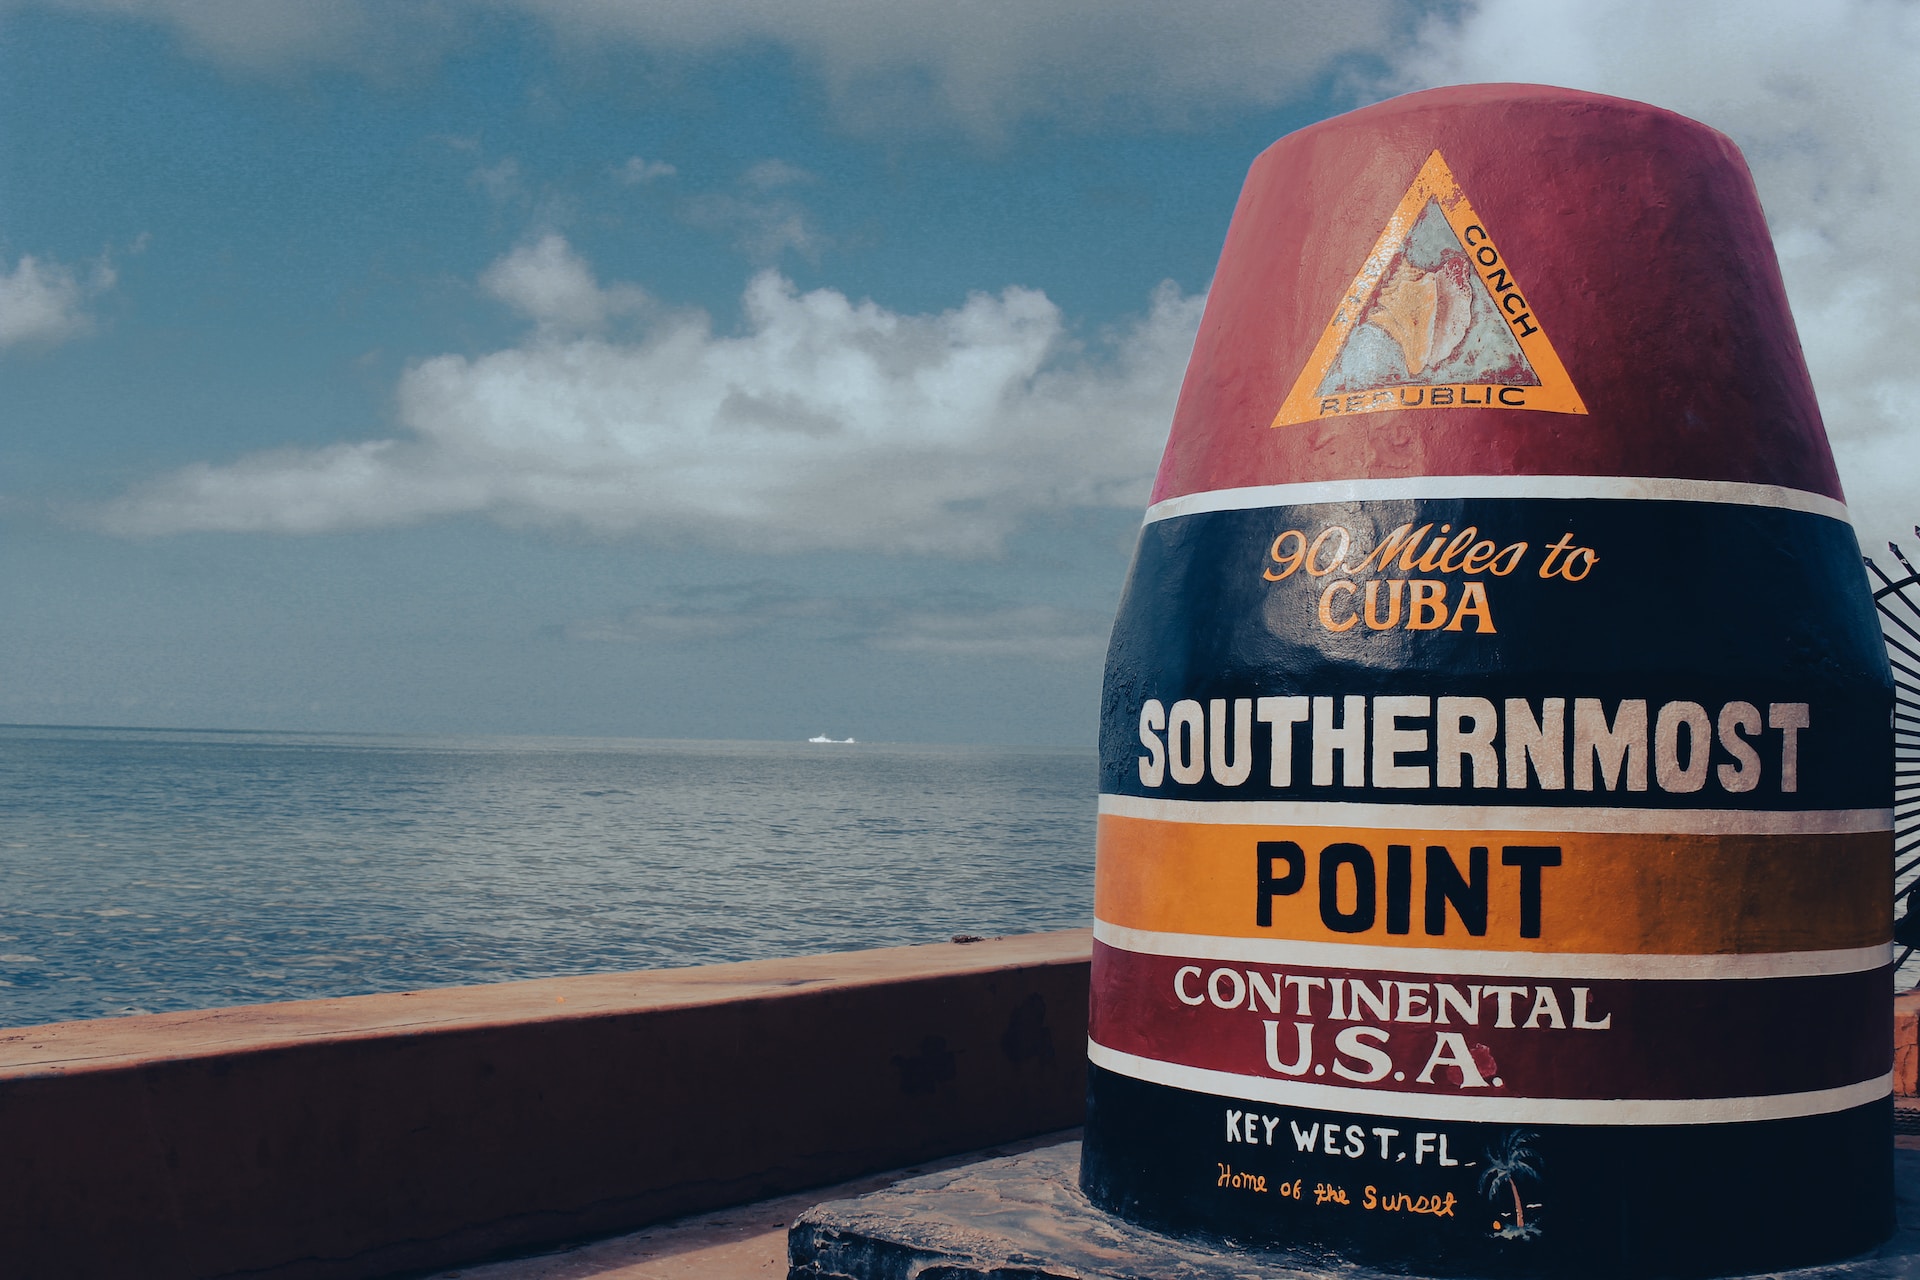 Key West is the southernmost point of the continental USA.